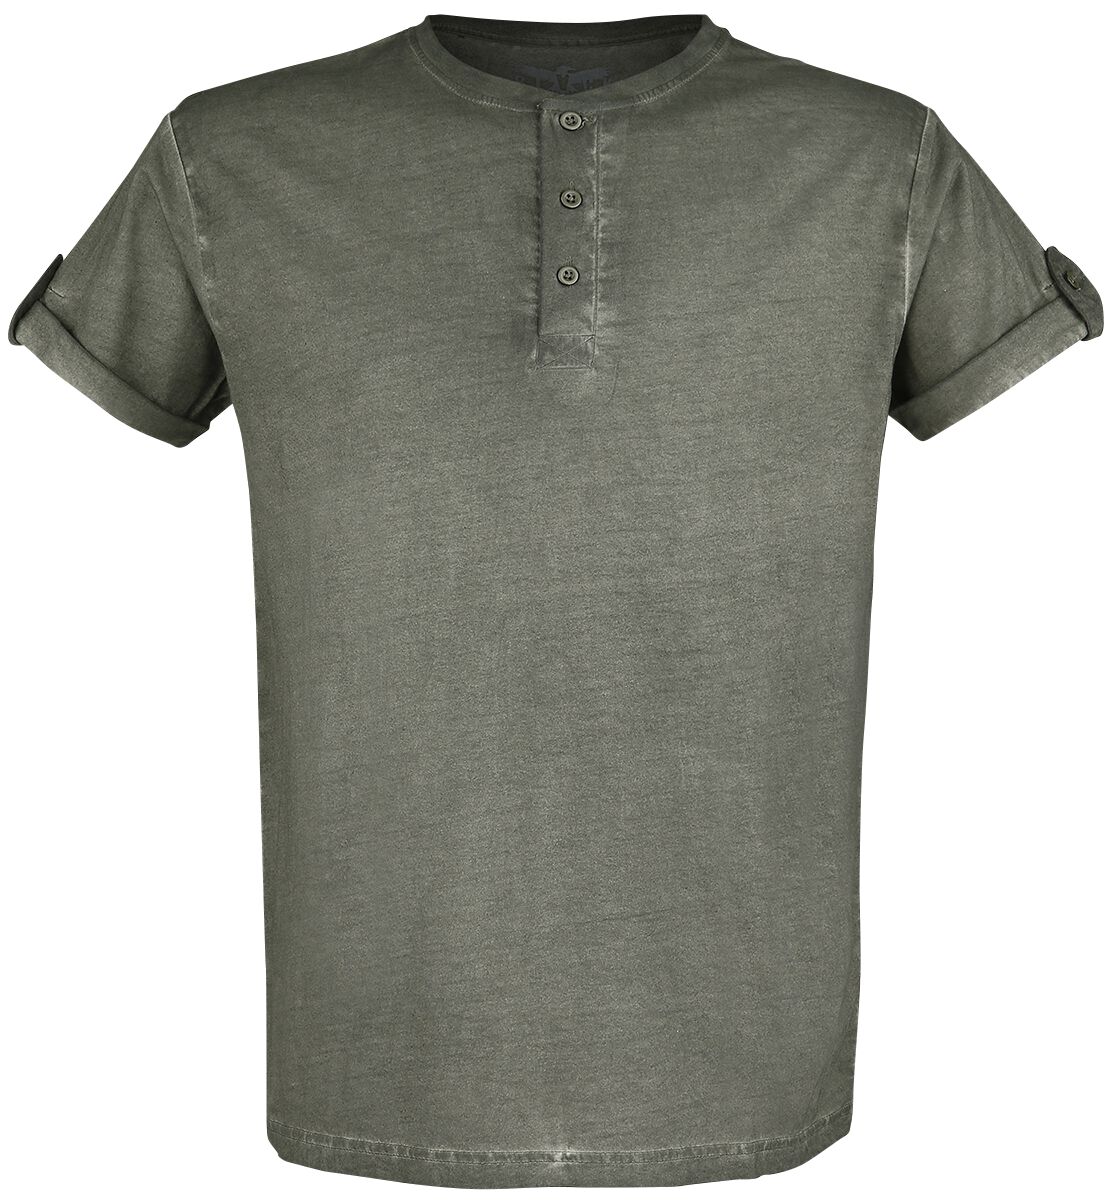 Image of T-Shirt di Black Premium by EMP - Green T-shirt with Buttons and Turn-up Sleeves - S a 5XL - Uomo - verde